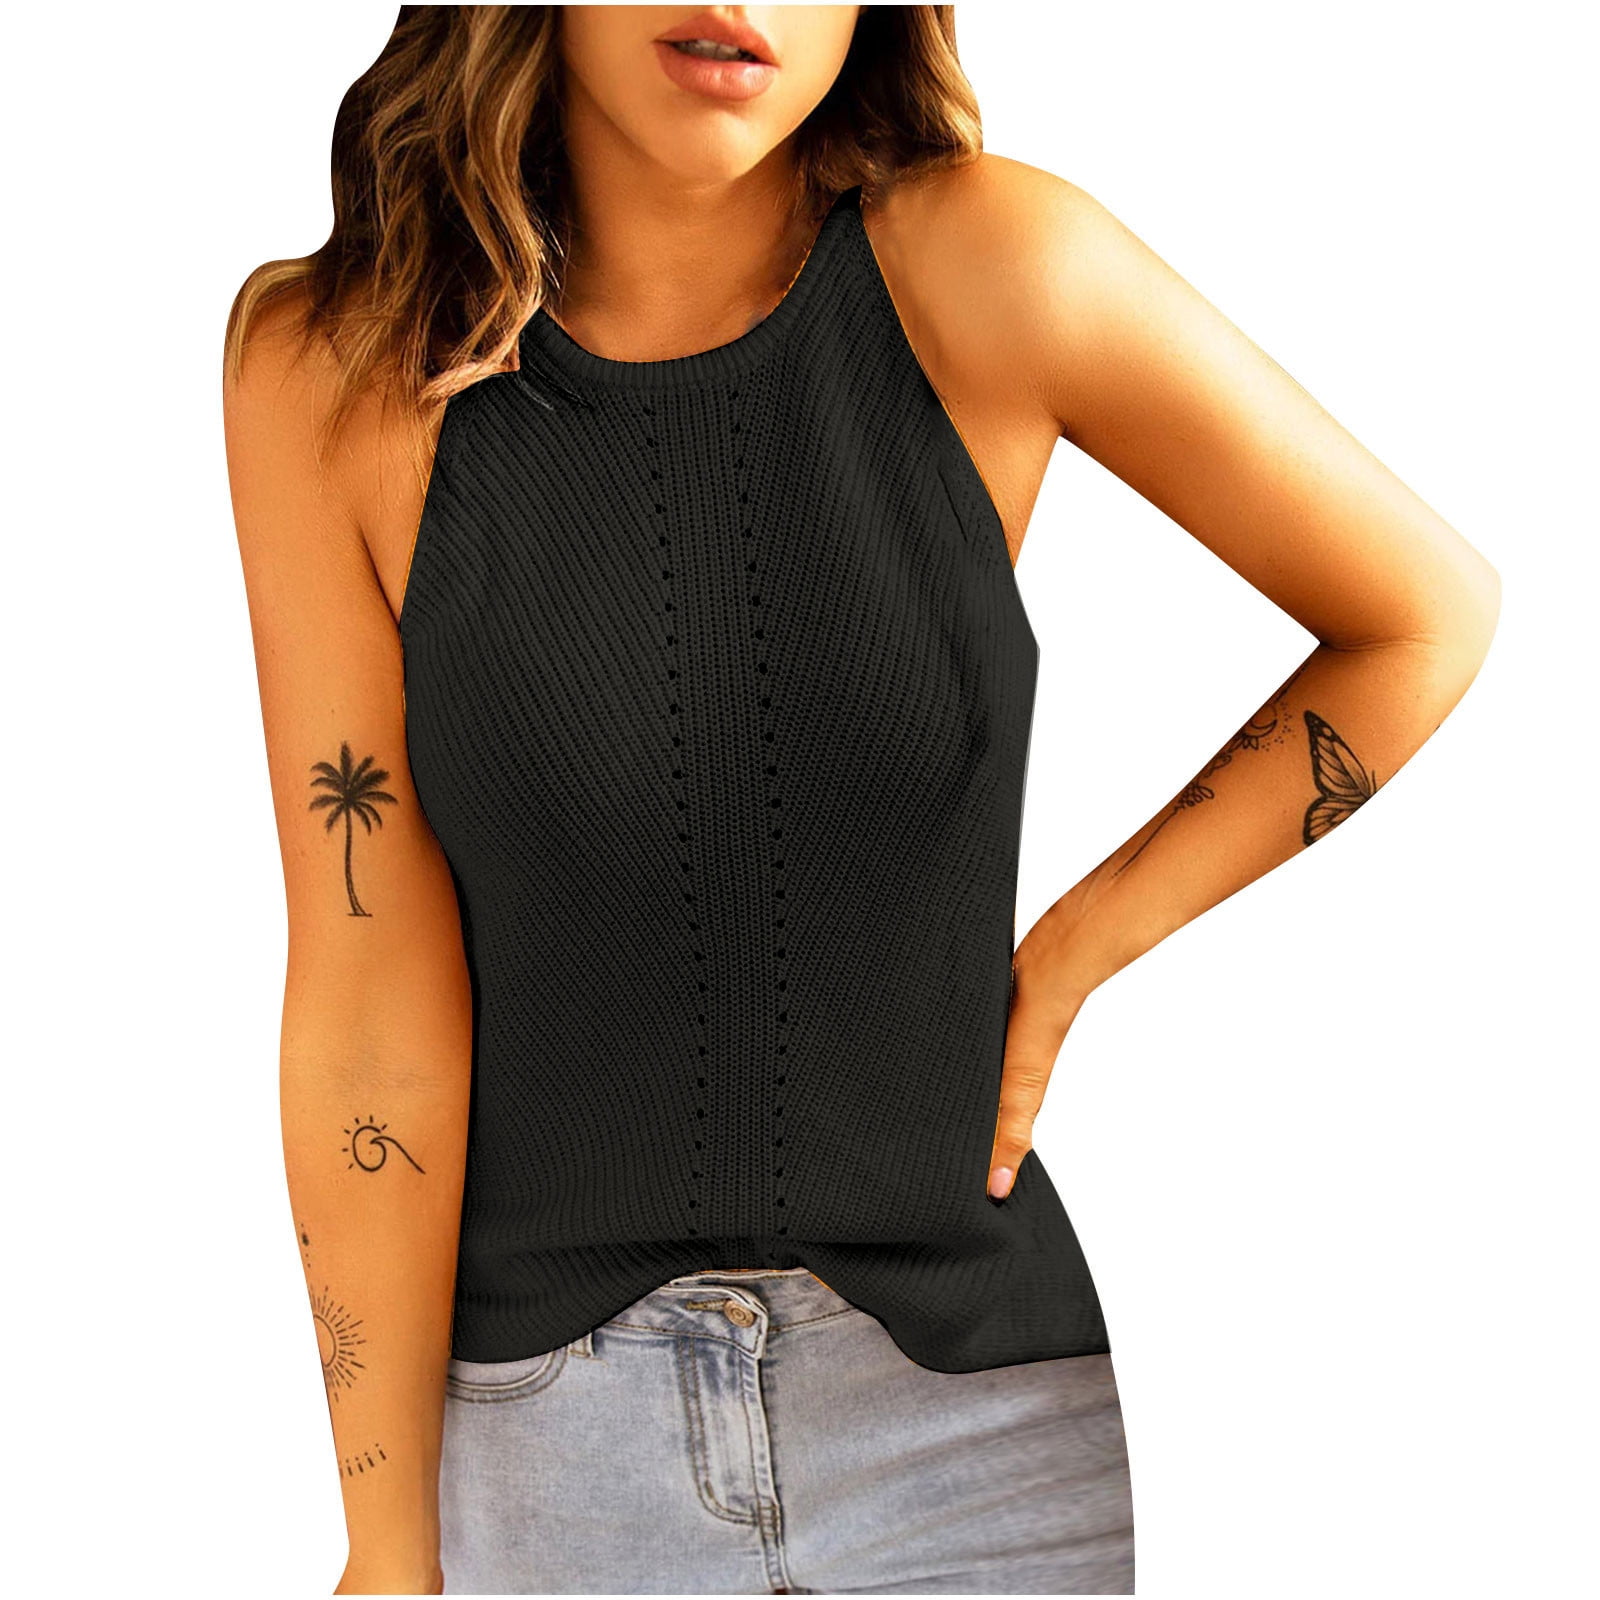 YYDGH Women's Knit Crop Top Ribbed Sleeveless Halter Neck Vest Tank Top  Black S